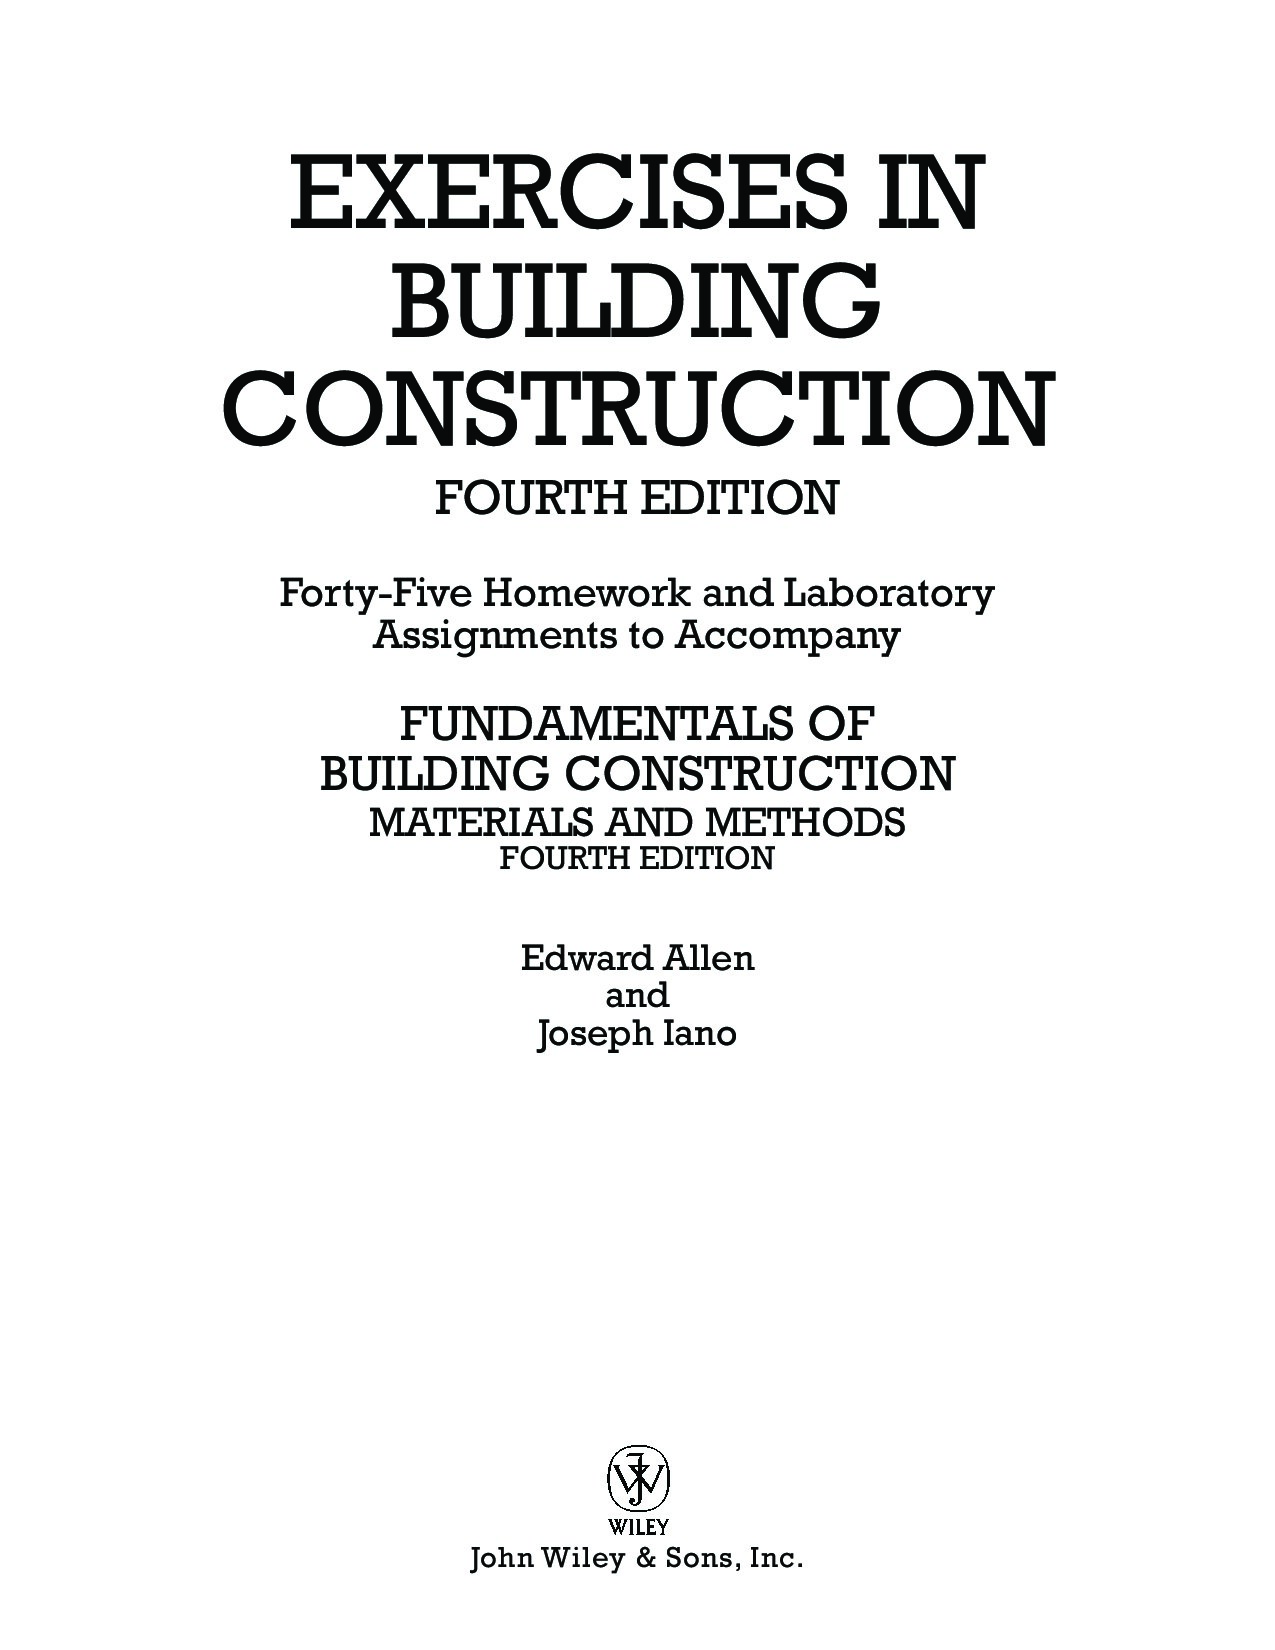 Exercises in Building Construction Materials and Methods by Edward Allen